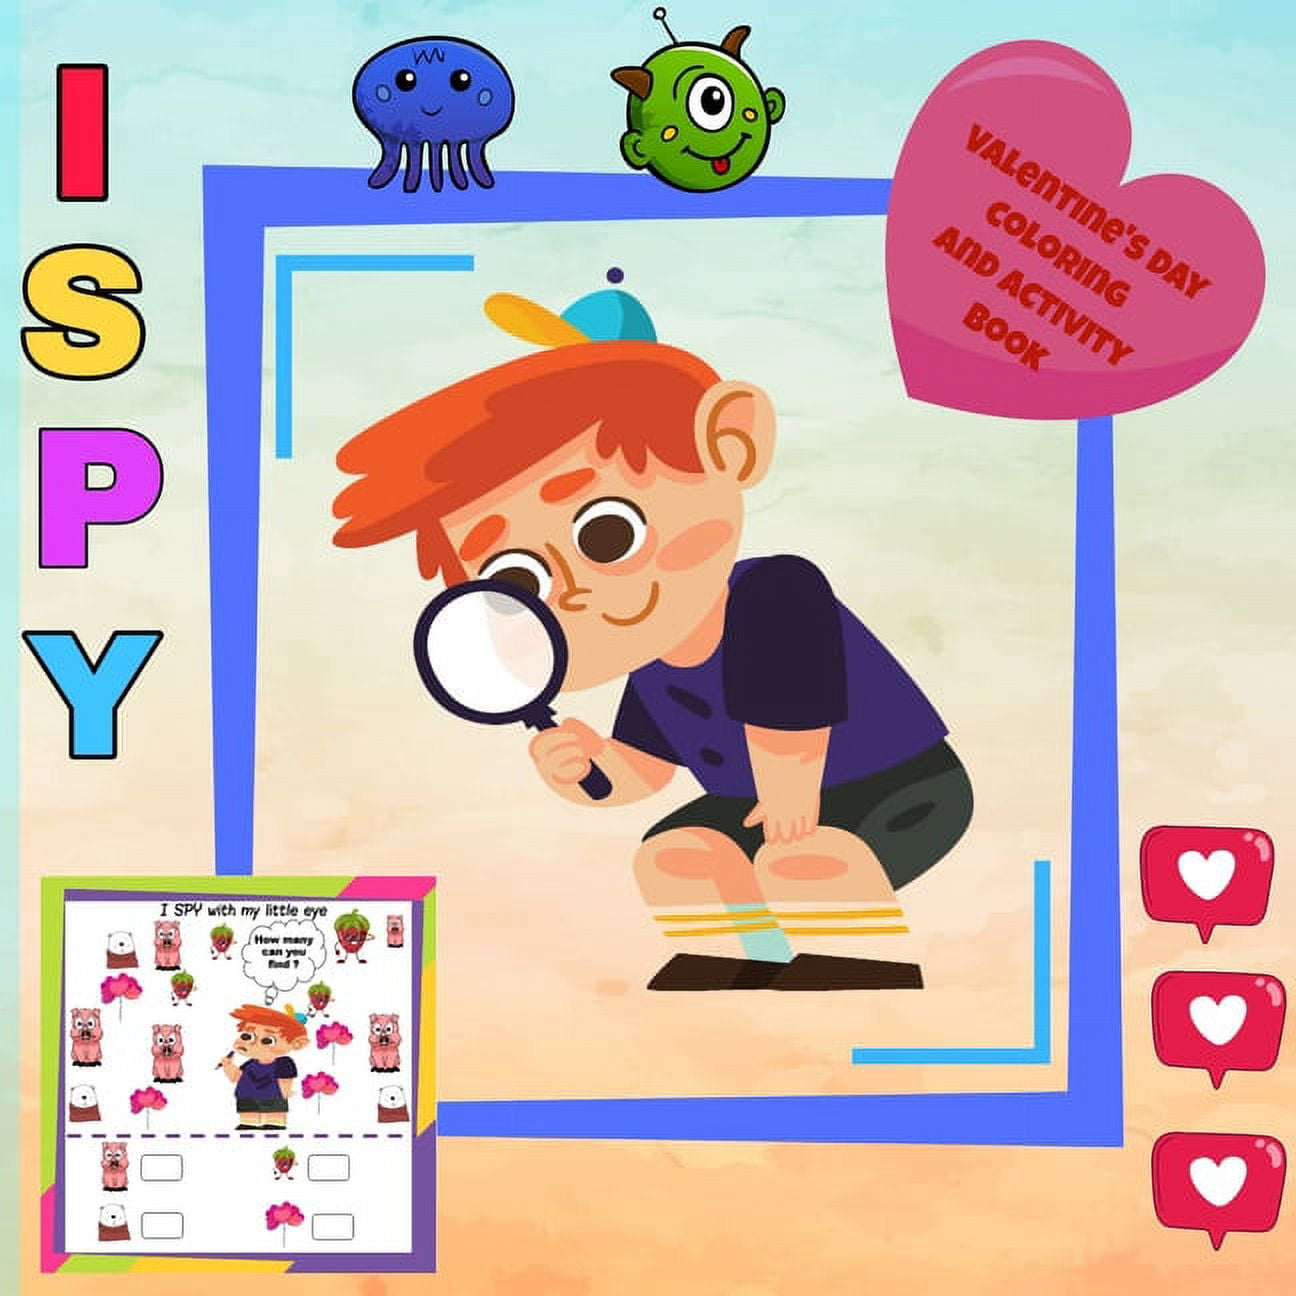 I spy valentines day coloring and activity book funny valentines day gifts for kids cute animals coloring book for kids ages